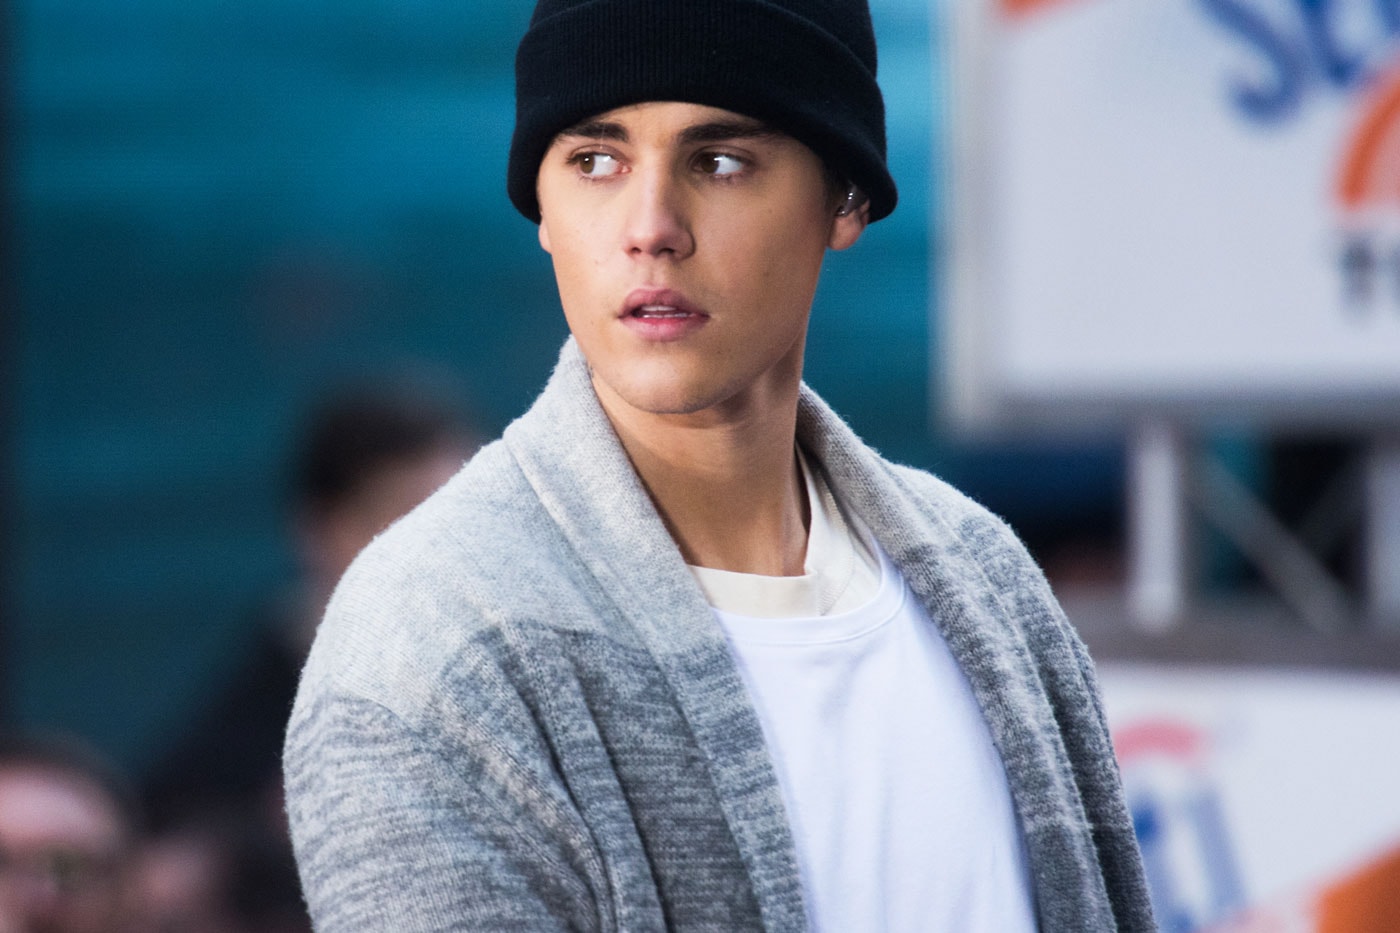 Justin Bieber Releases Dance Video for "Sorry"